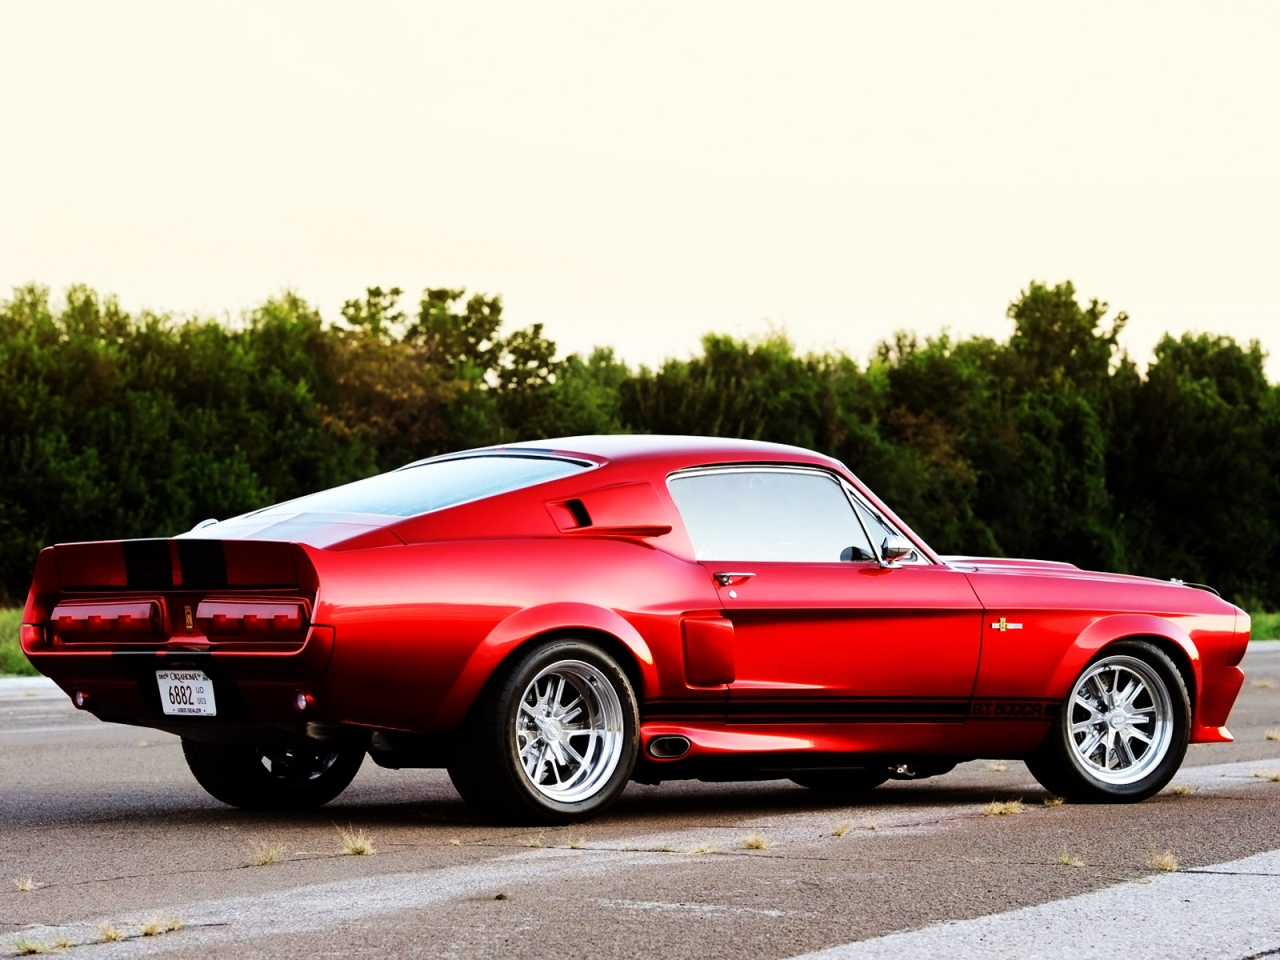 2011 Shelby GT500CR Rear for 1280 x 960 resolution